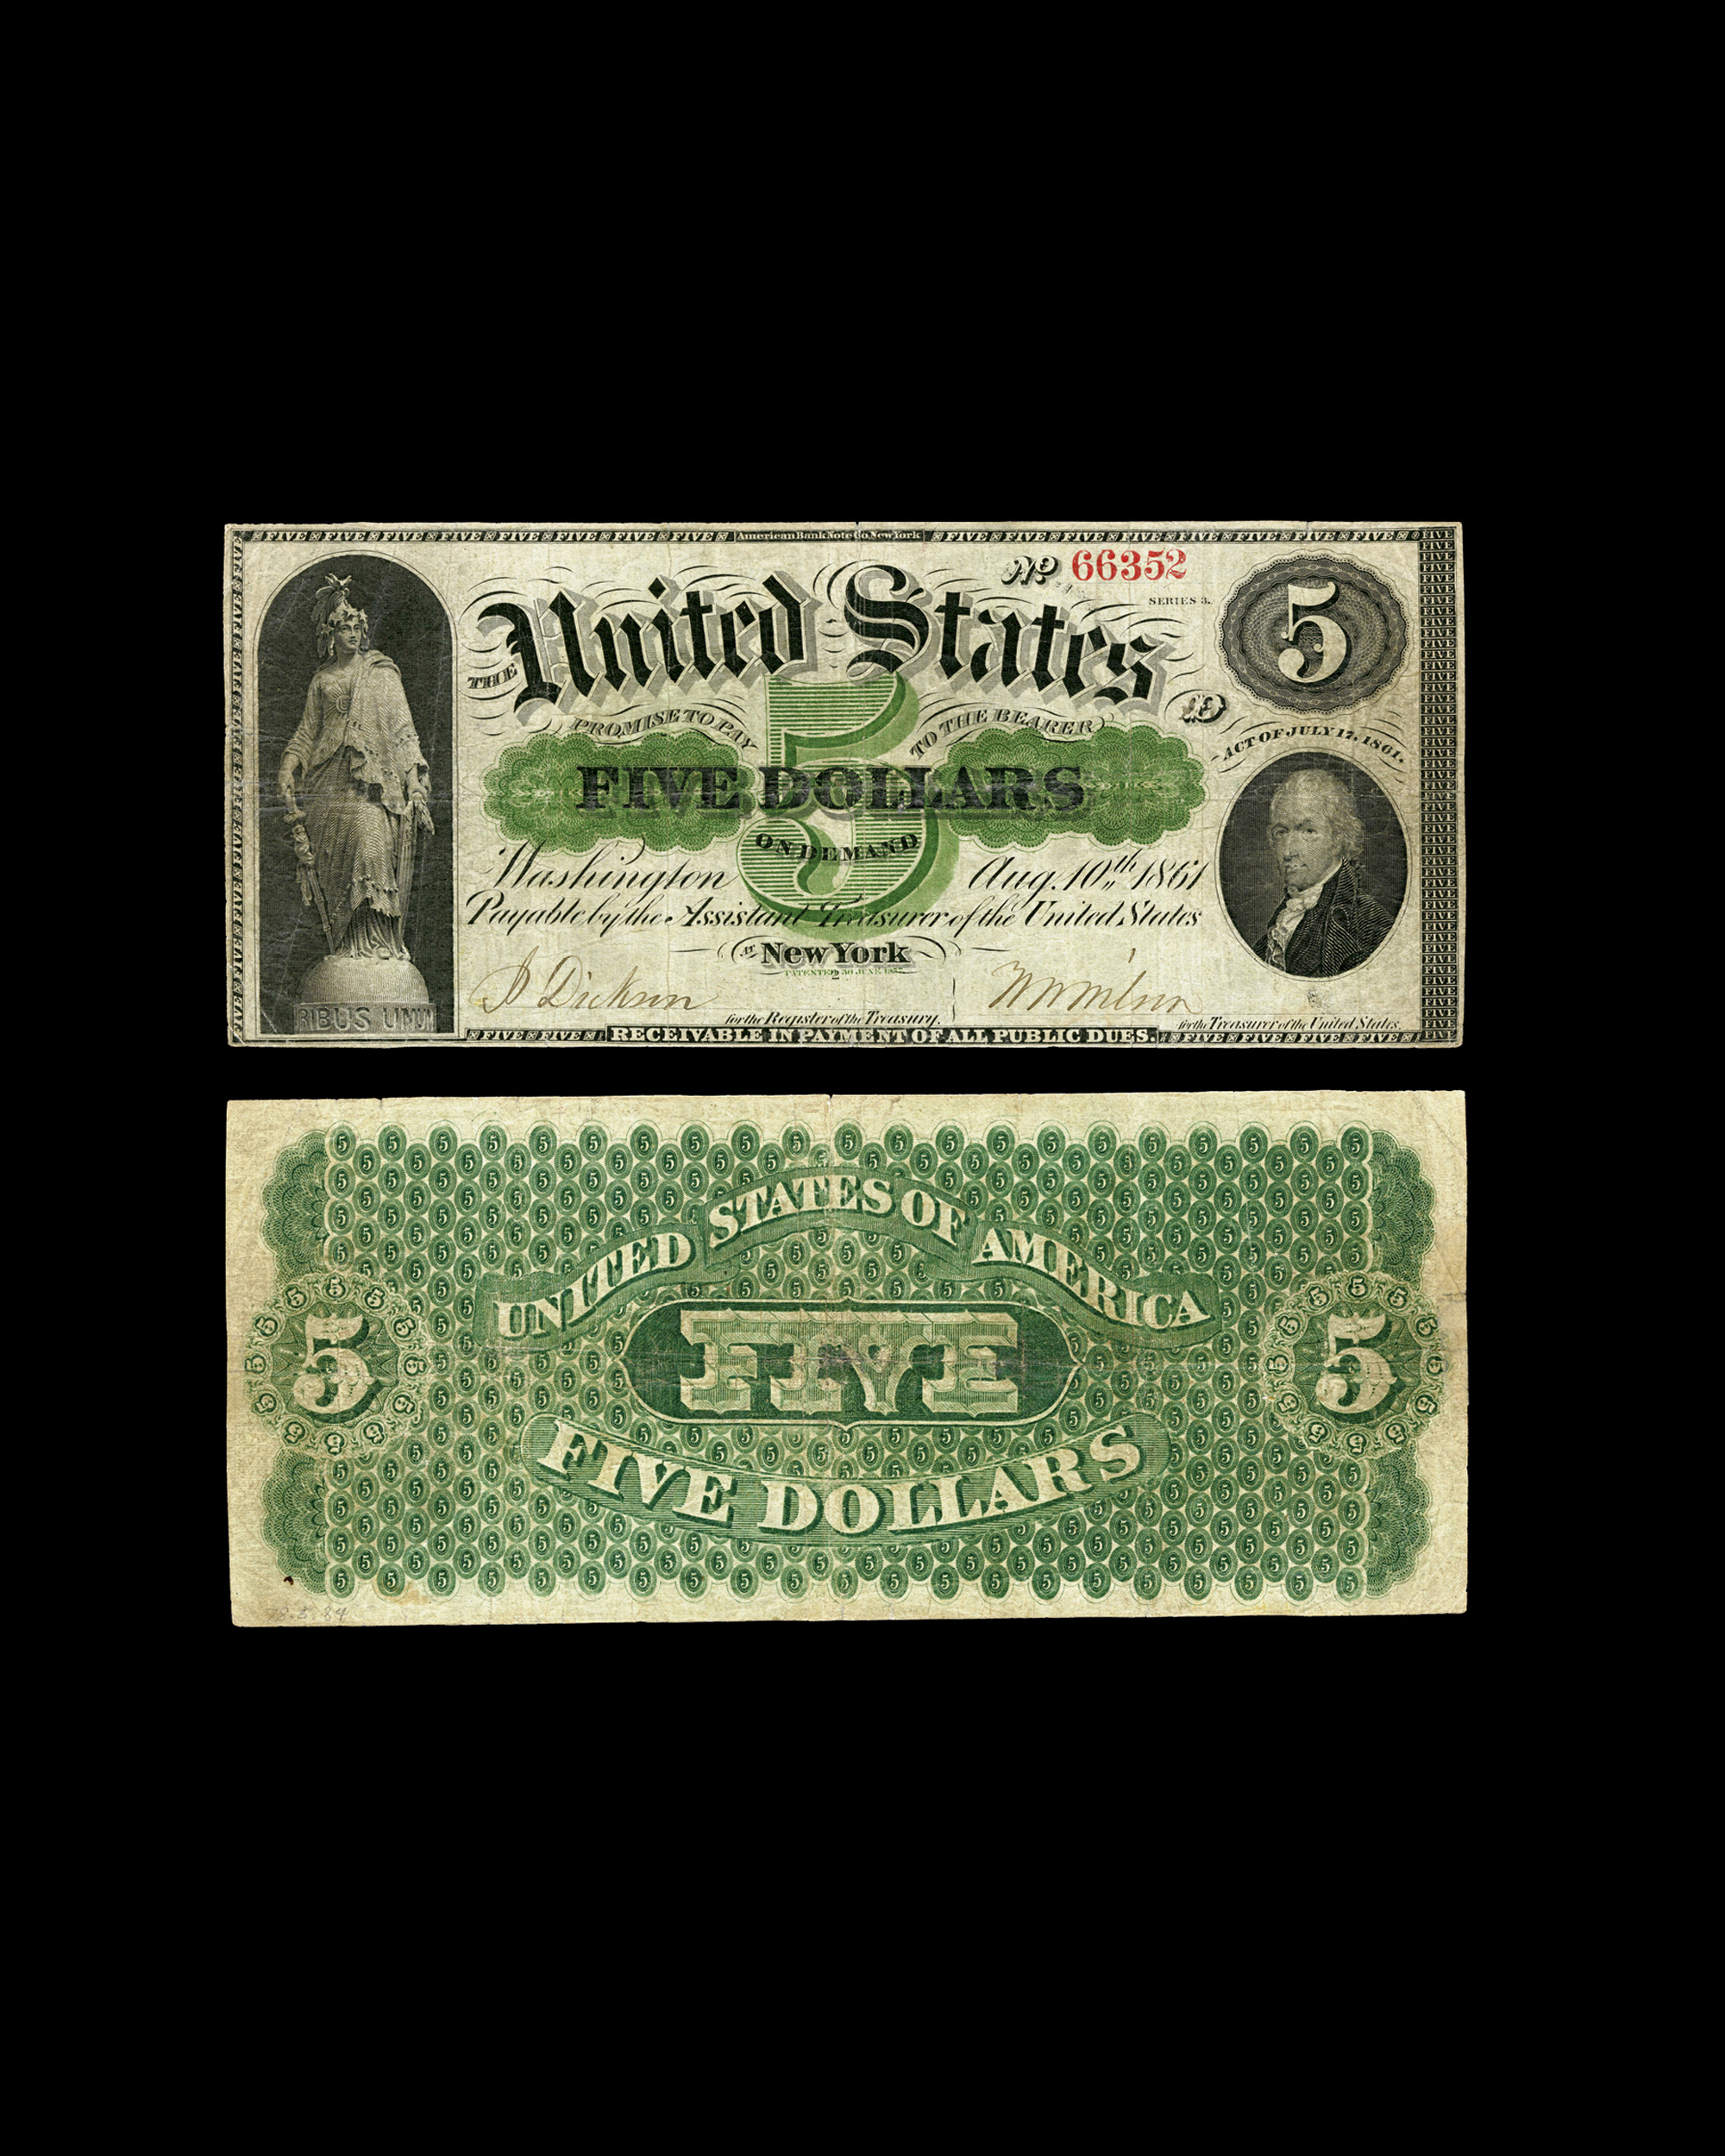 An image of the front and back of a five-dollar note issued by the US federal government in August eighteen sixty-one, during the early days of Civil War. The figure of Liberty is shown wears a brooch marked “U.S.” Her shield contains the national seal, and the national motto “E Pluribus Unum” encircles the base on which she stands.